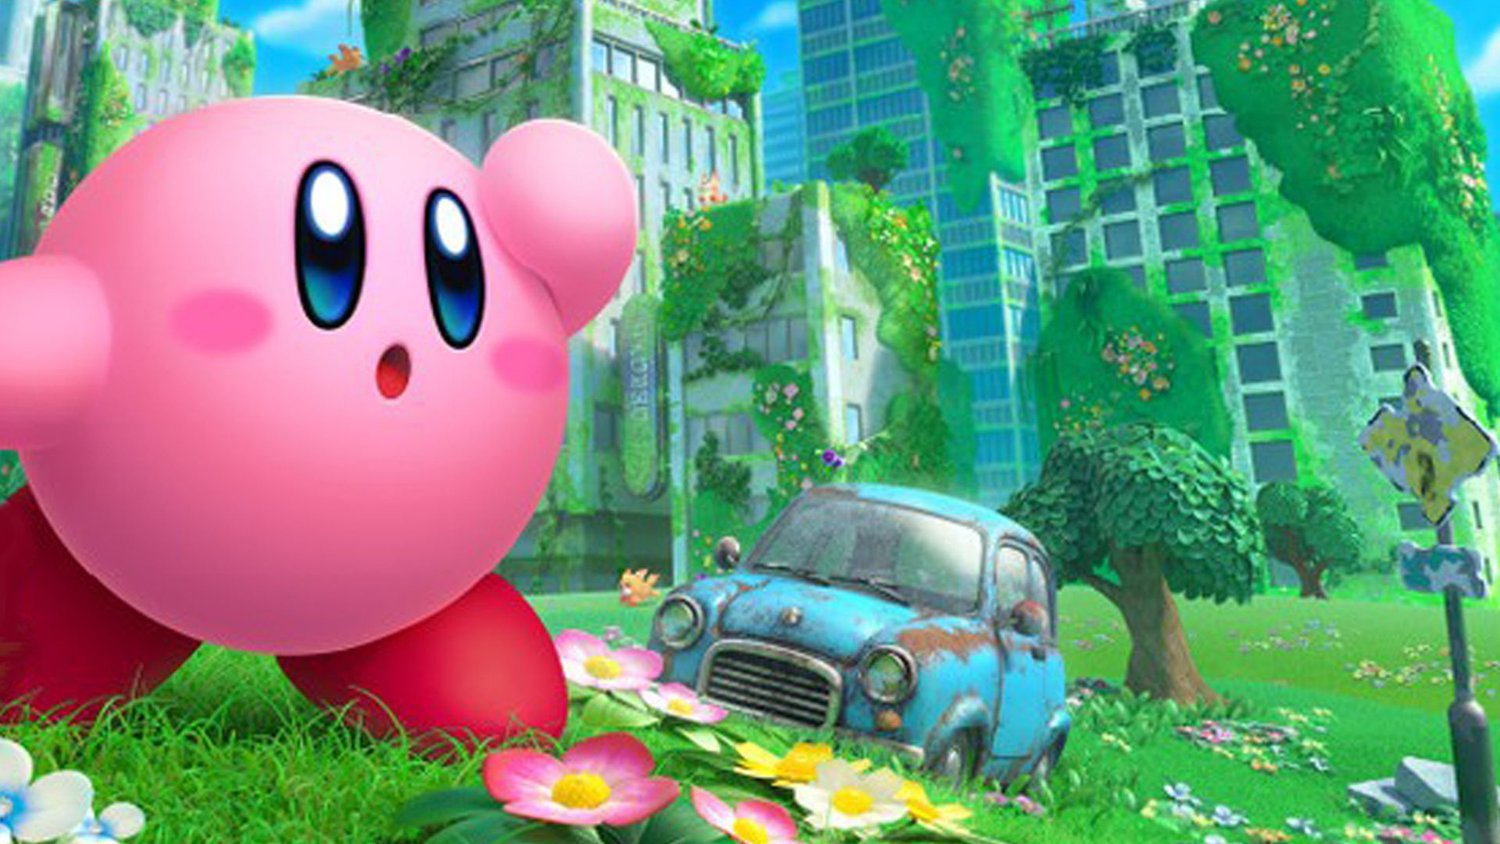  Kirby and the Forgotten Land - US Version : Nintendo of  America: Everything Else